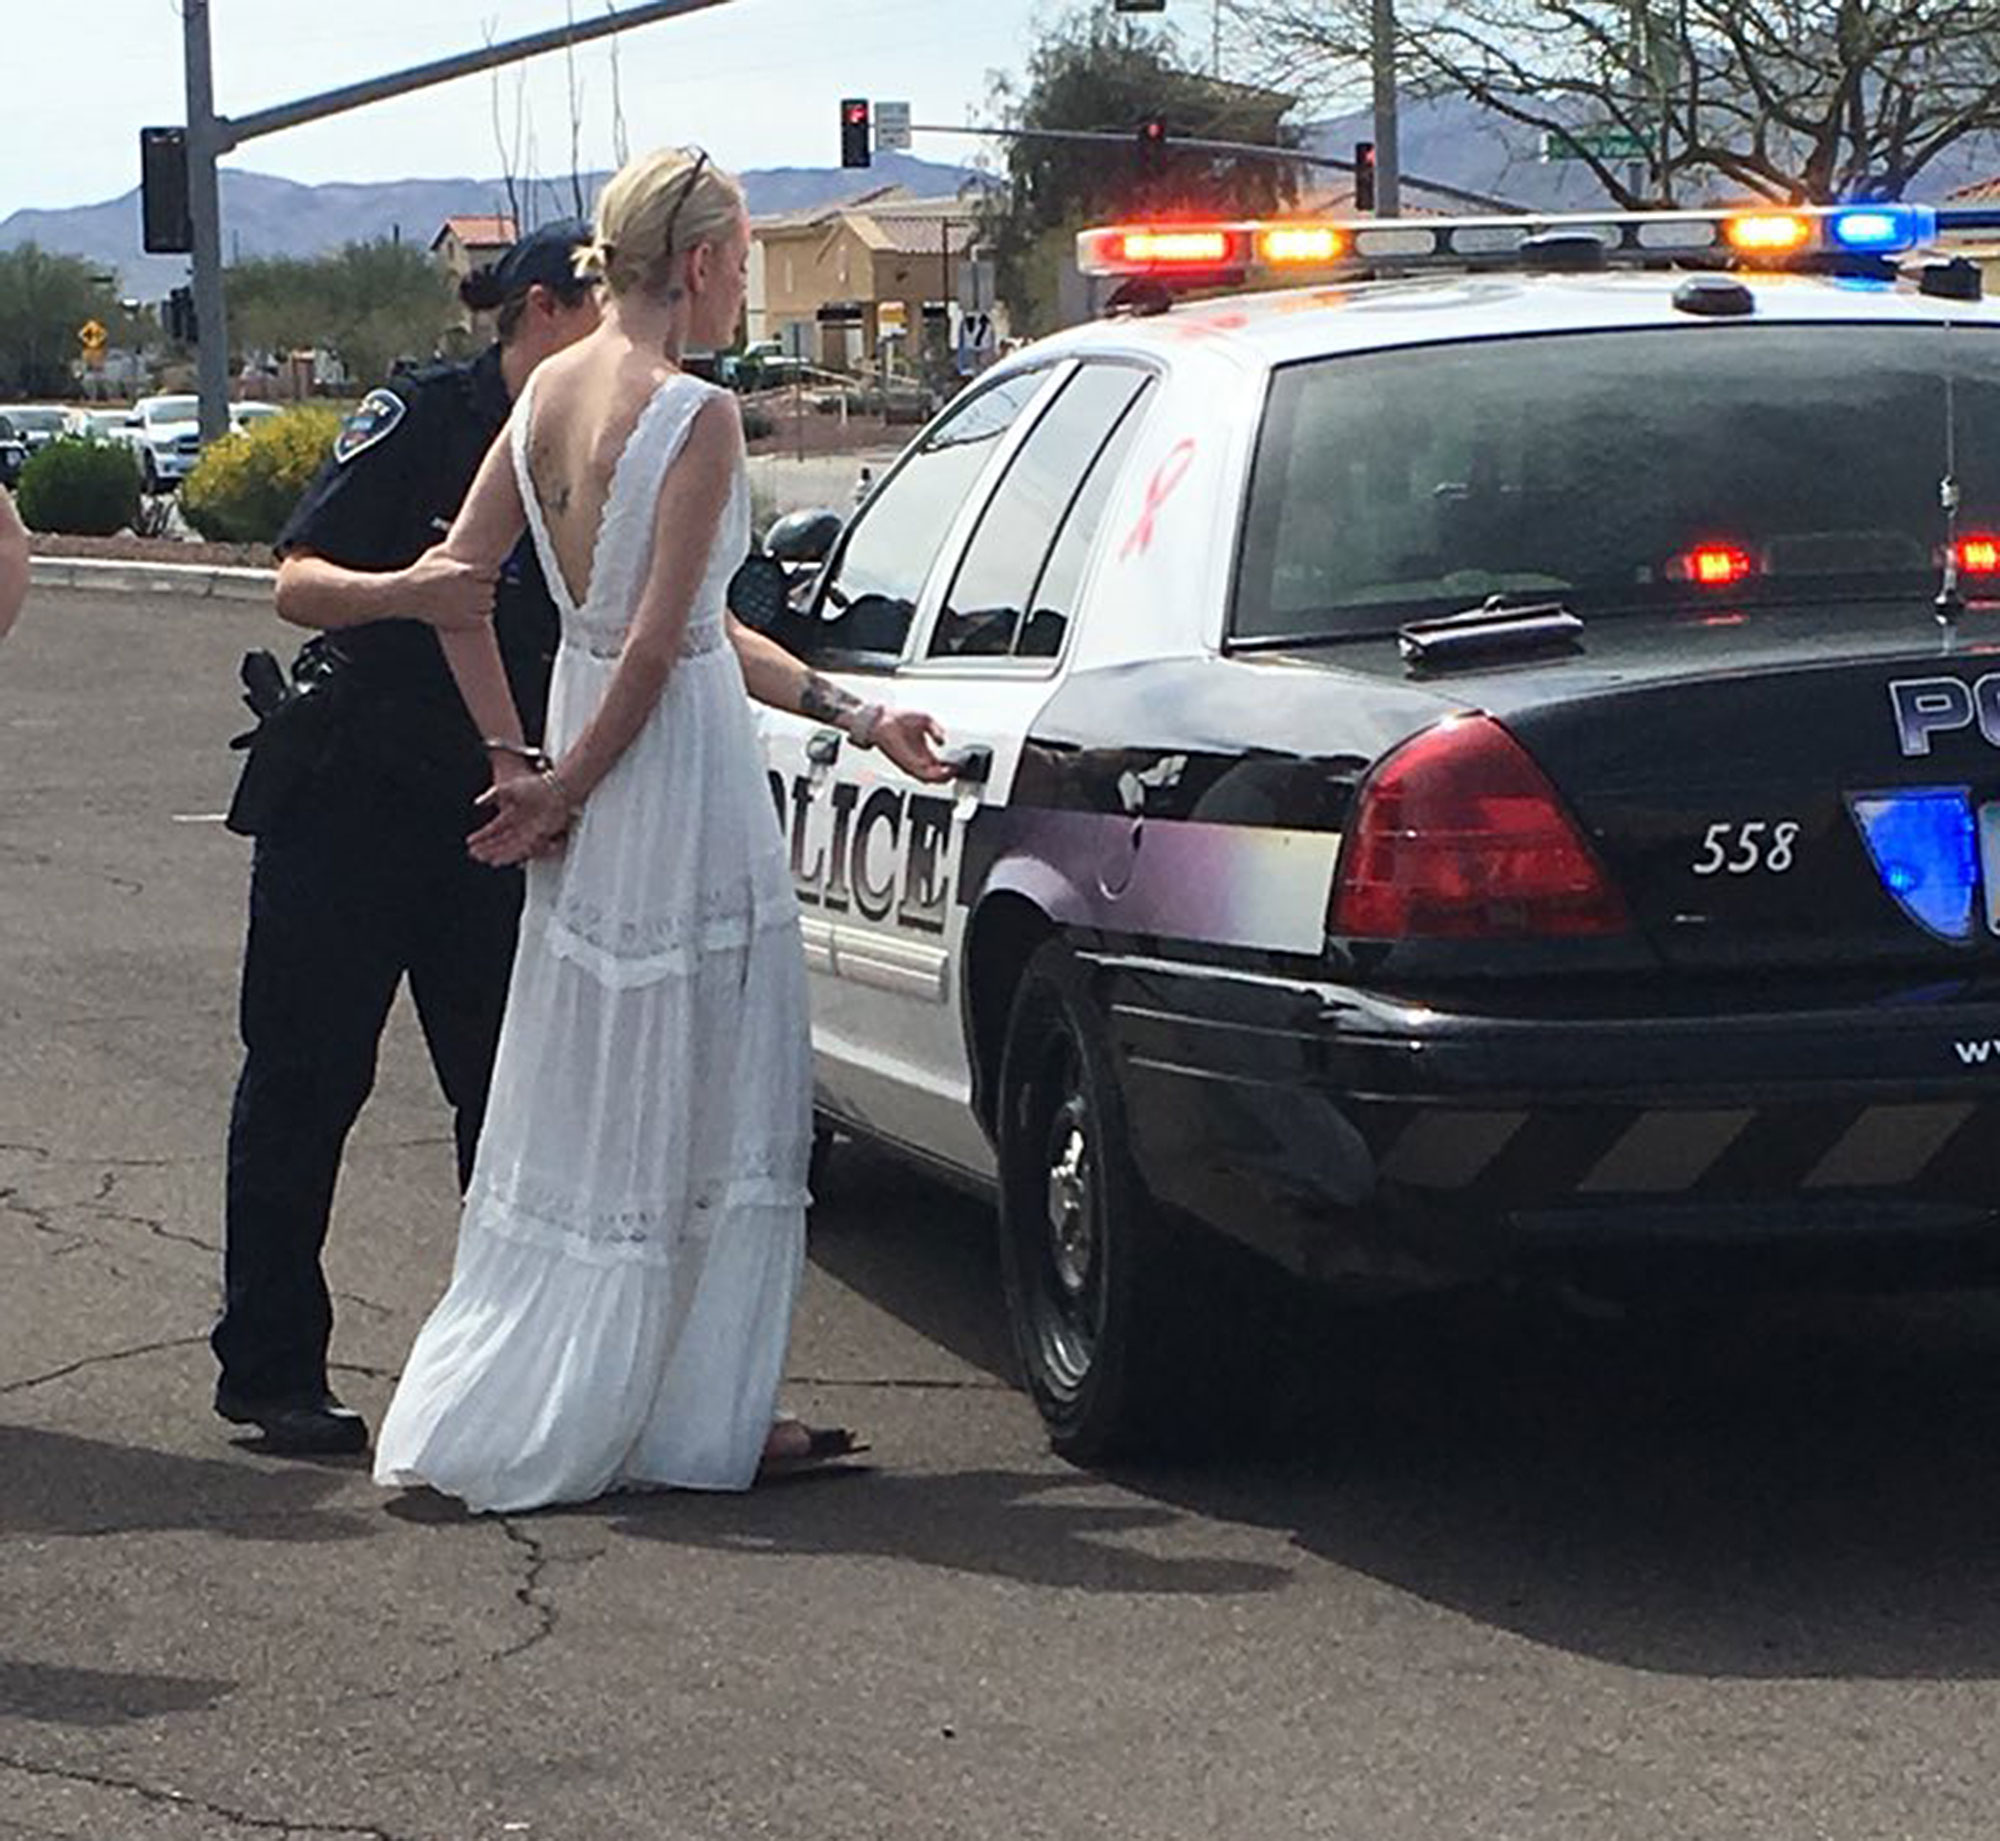 arizona bride arrested for allegedly driving under the influence to her own wedding